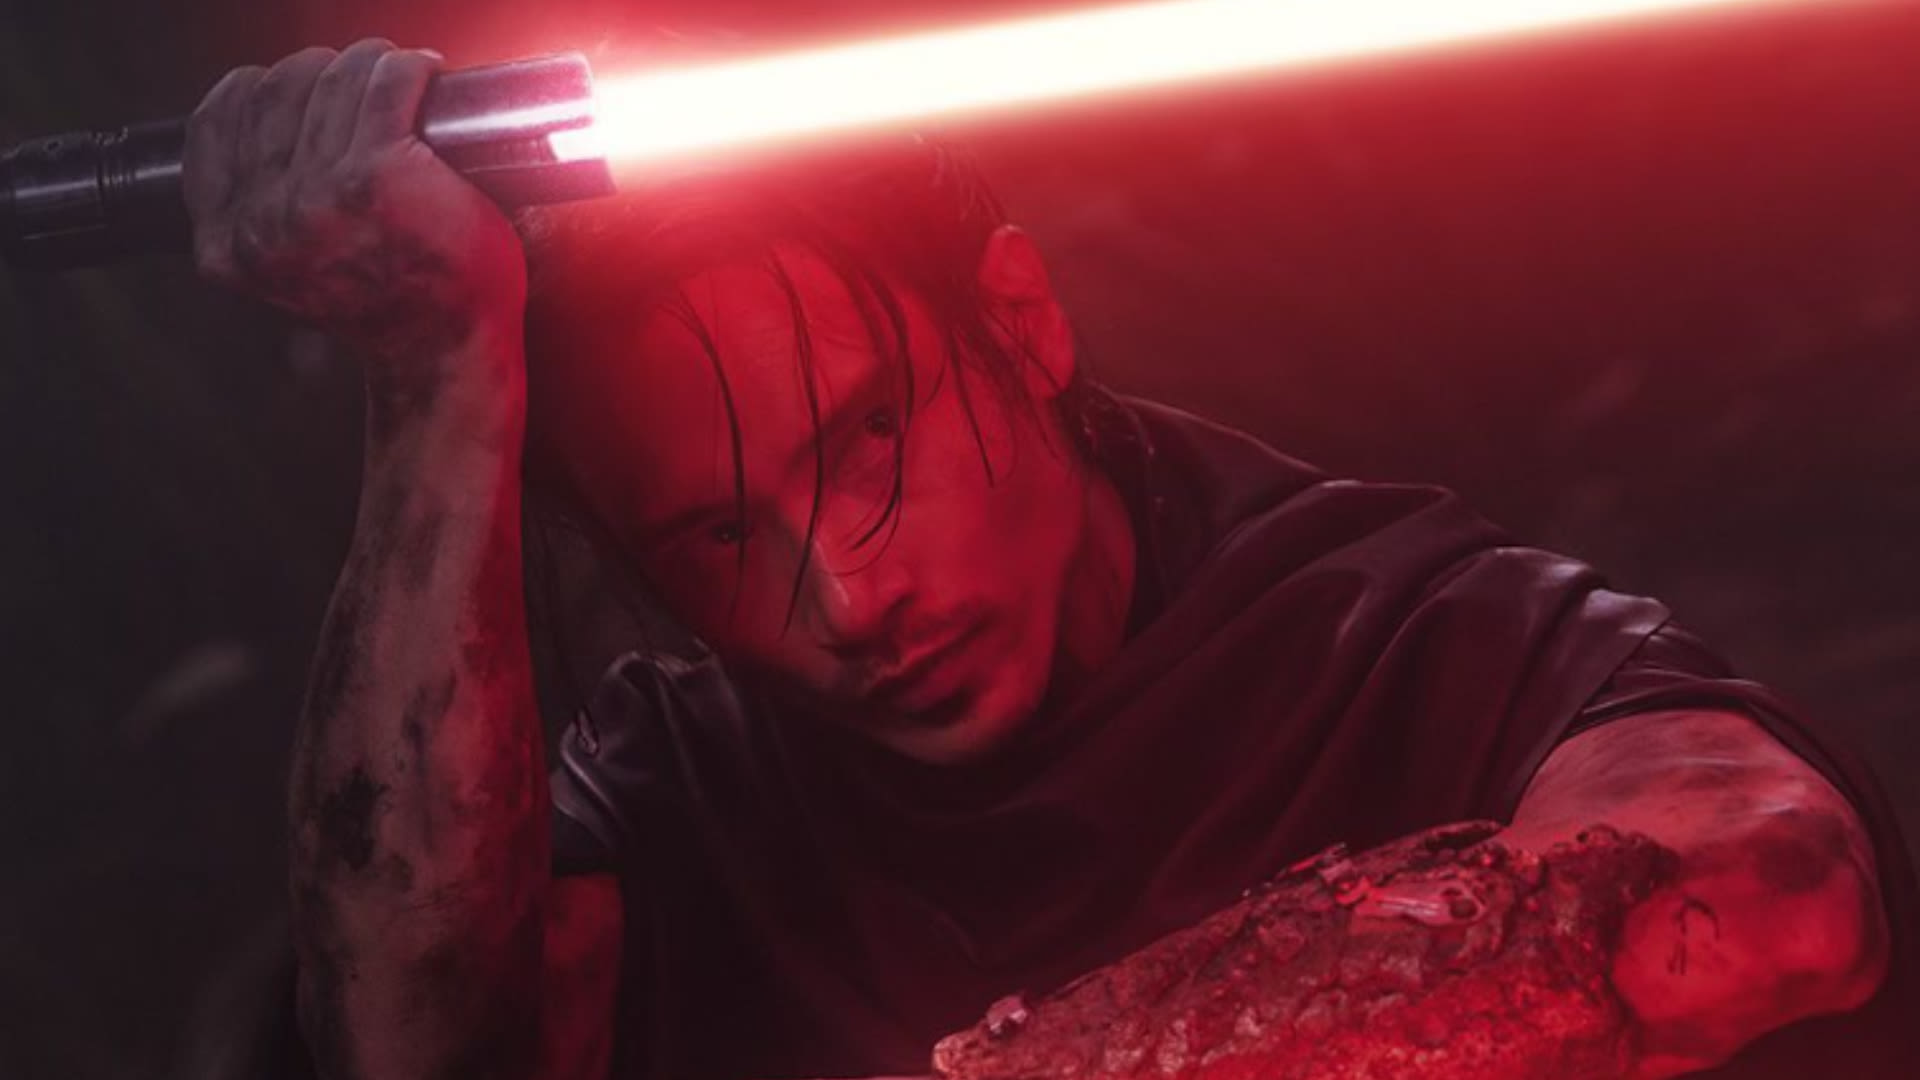 A Rey and Kylo Ren moment in The Last Jedi inspired The Acolyte, as well as one of the best action films ever made